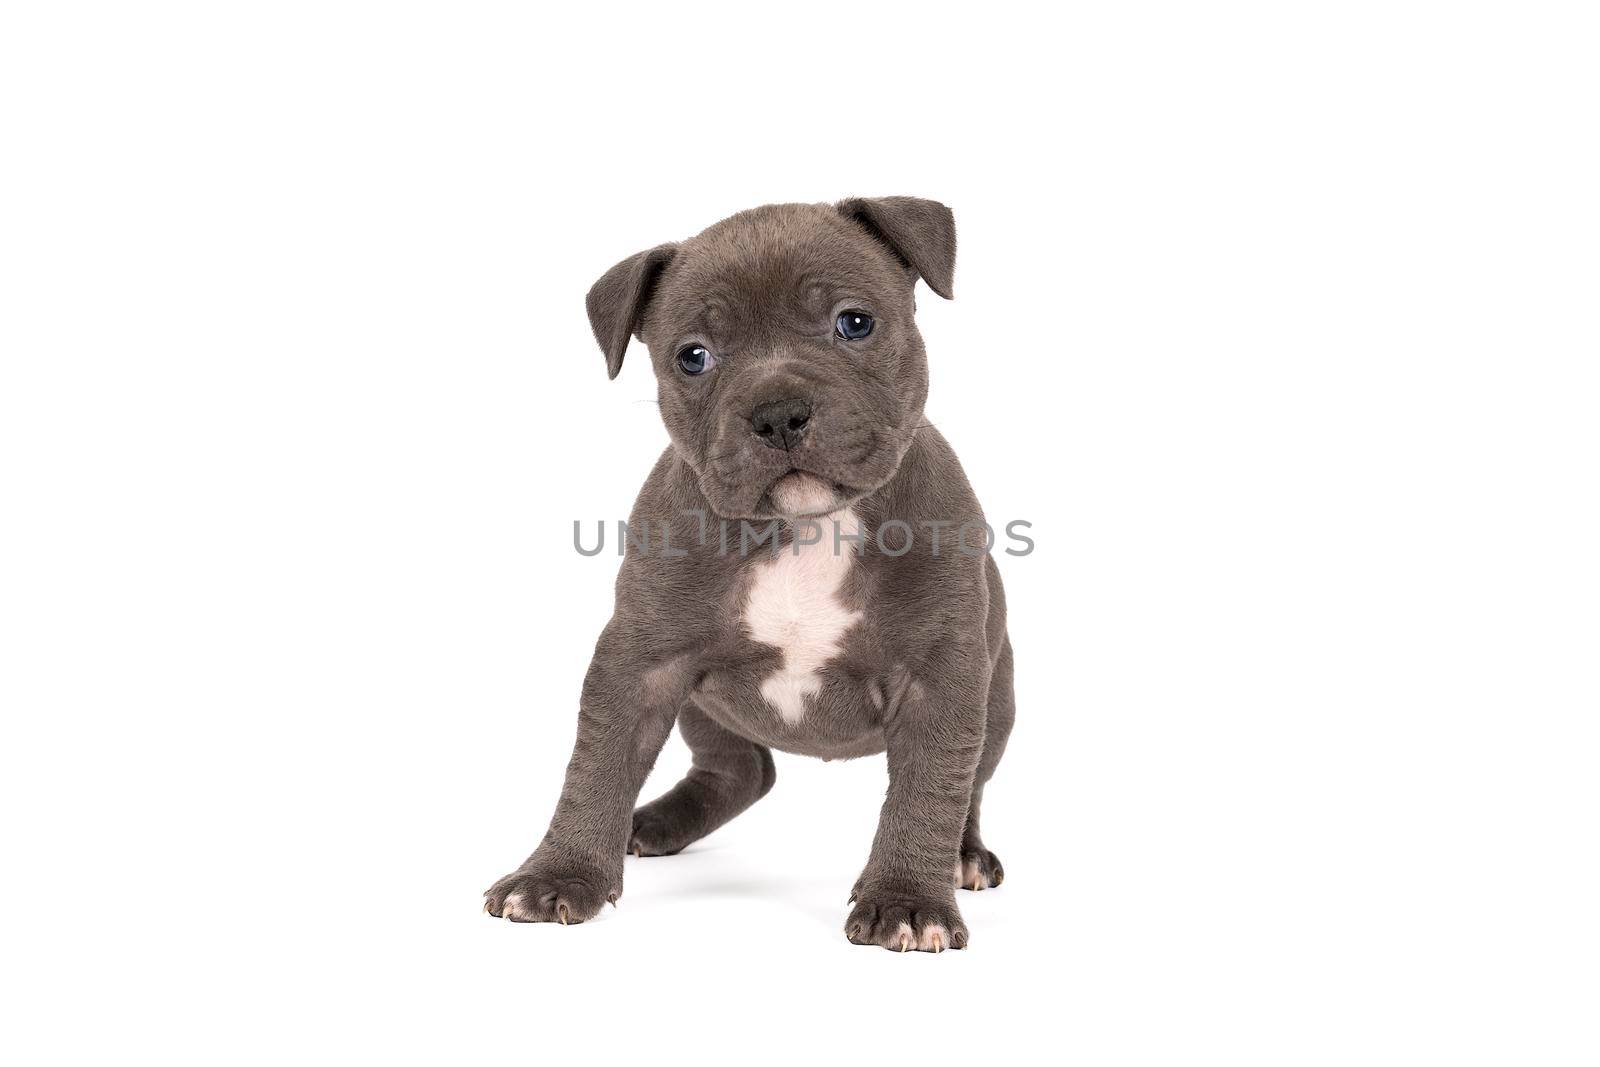 Purebred American Bully or Bulldog pup with blue and white fur standing looking at the camera isolated on a white background by LeoniekvanderVliet